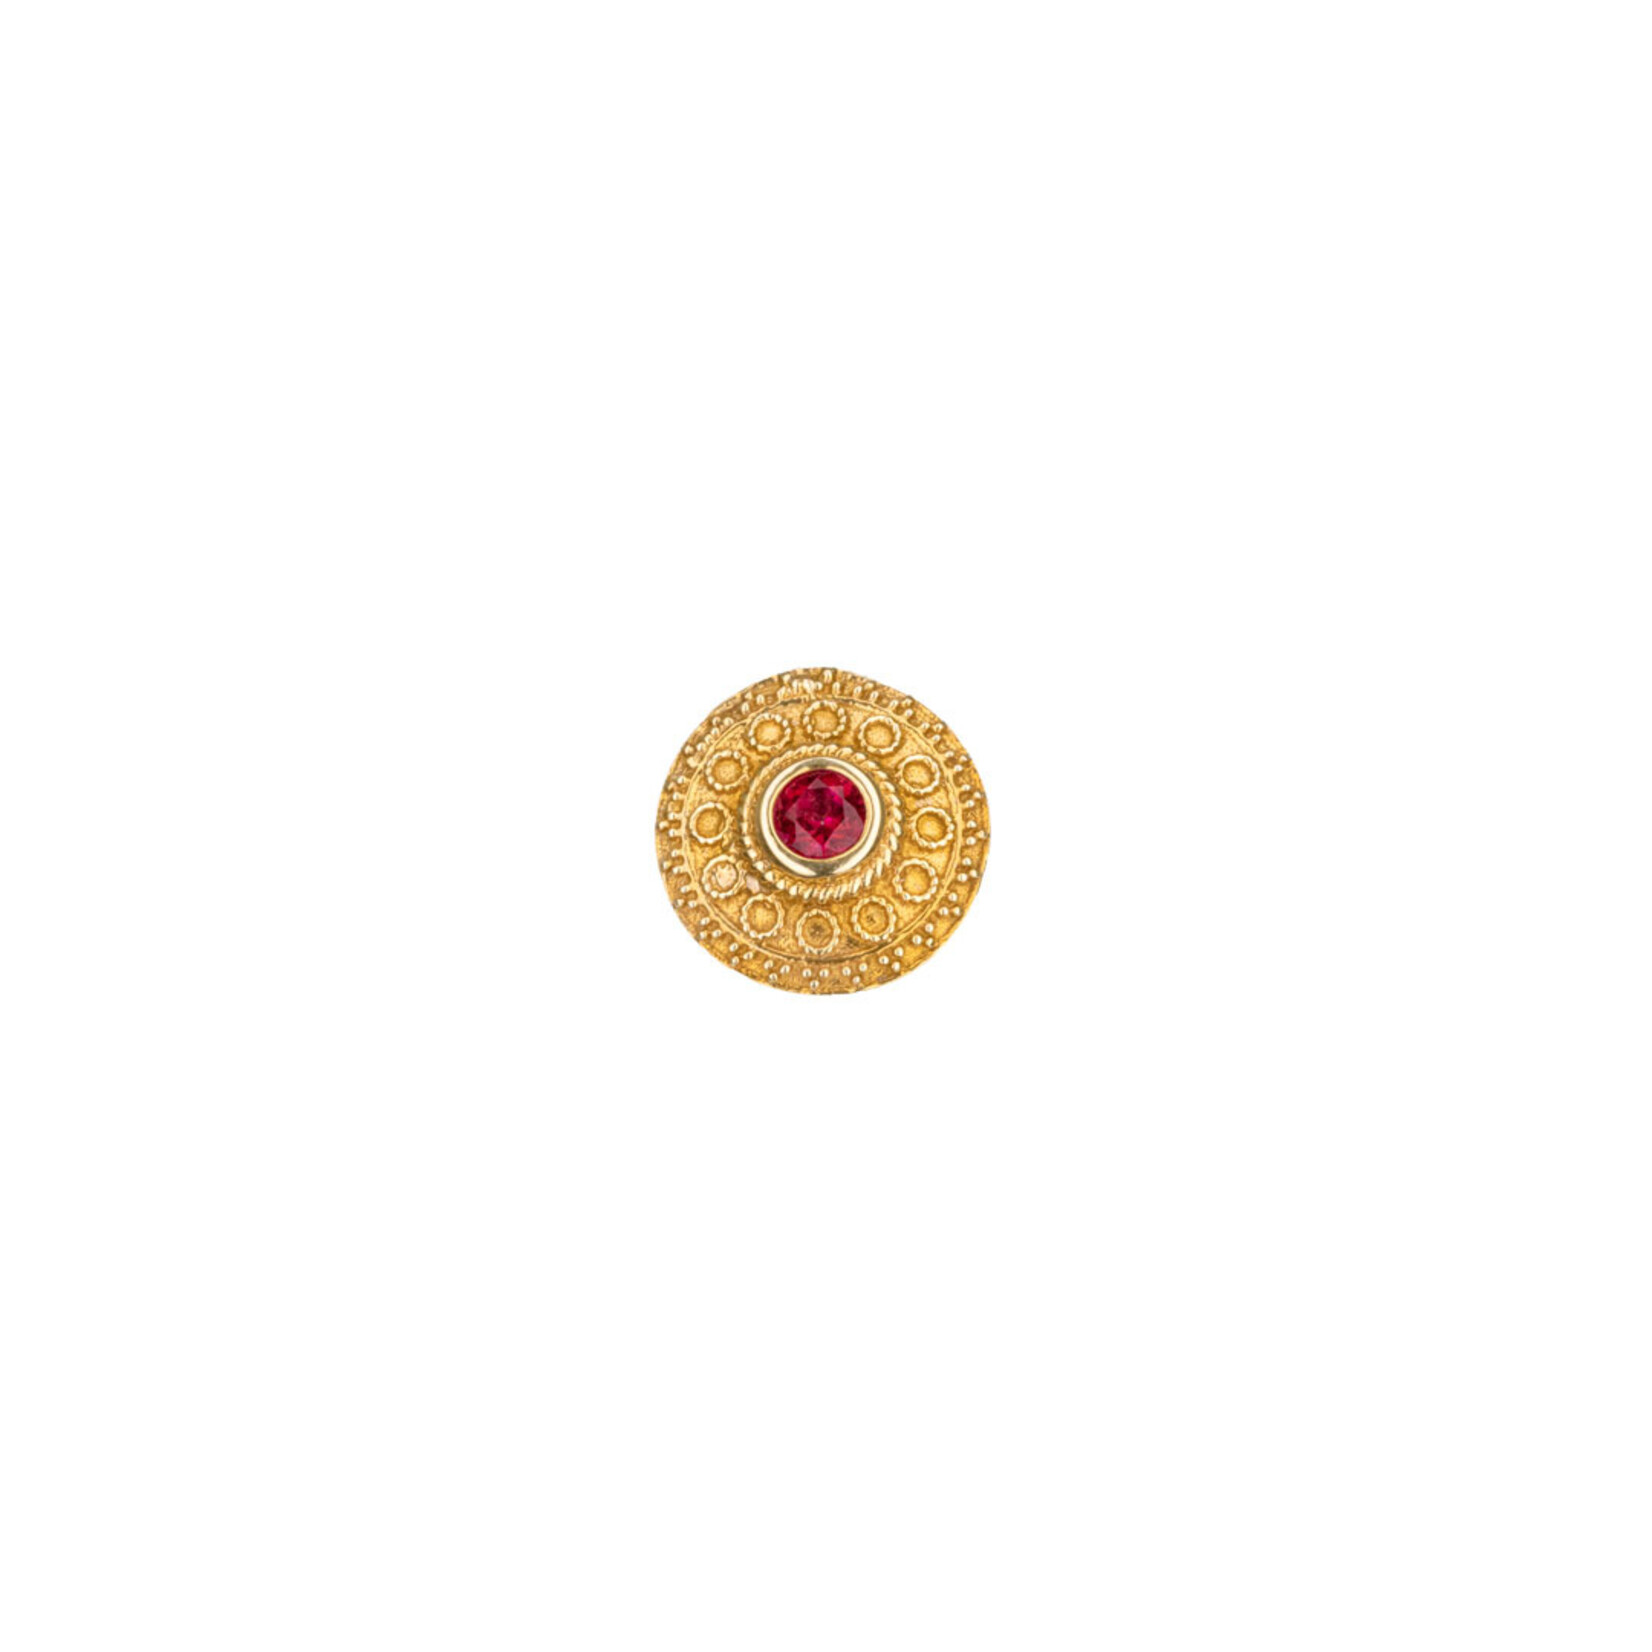 BVLA BVLA yellow gold 11.0 "Nanda" threaded end with 3.0 blazing red topaz & 24k plate